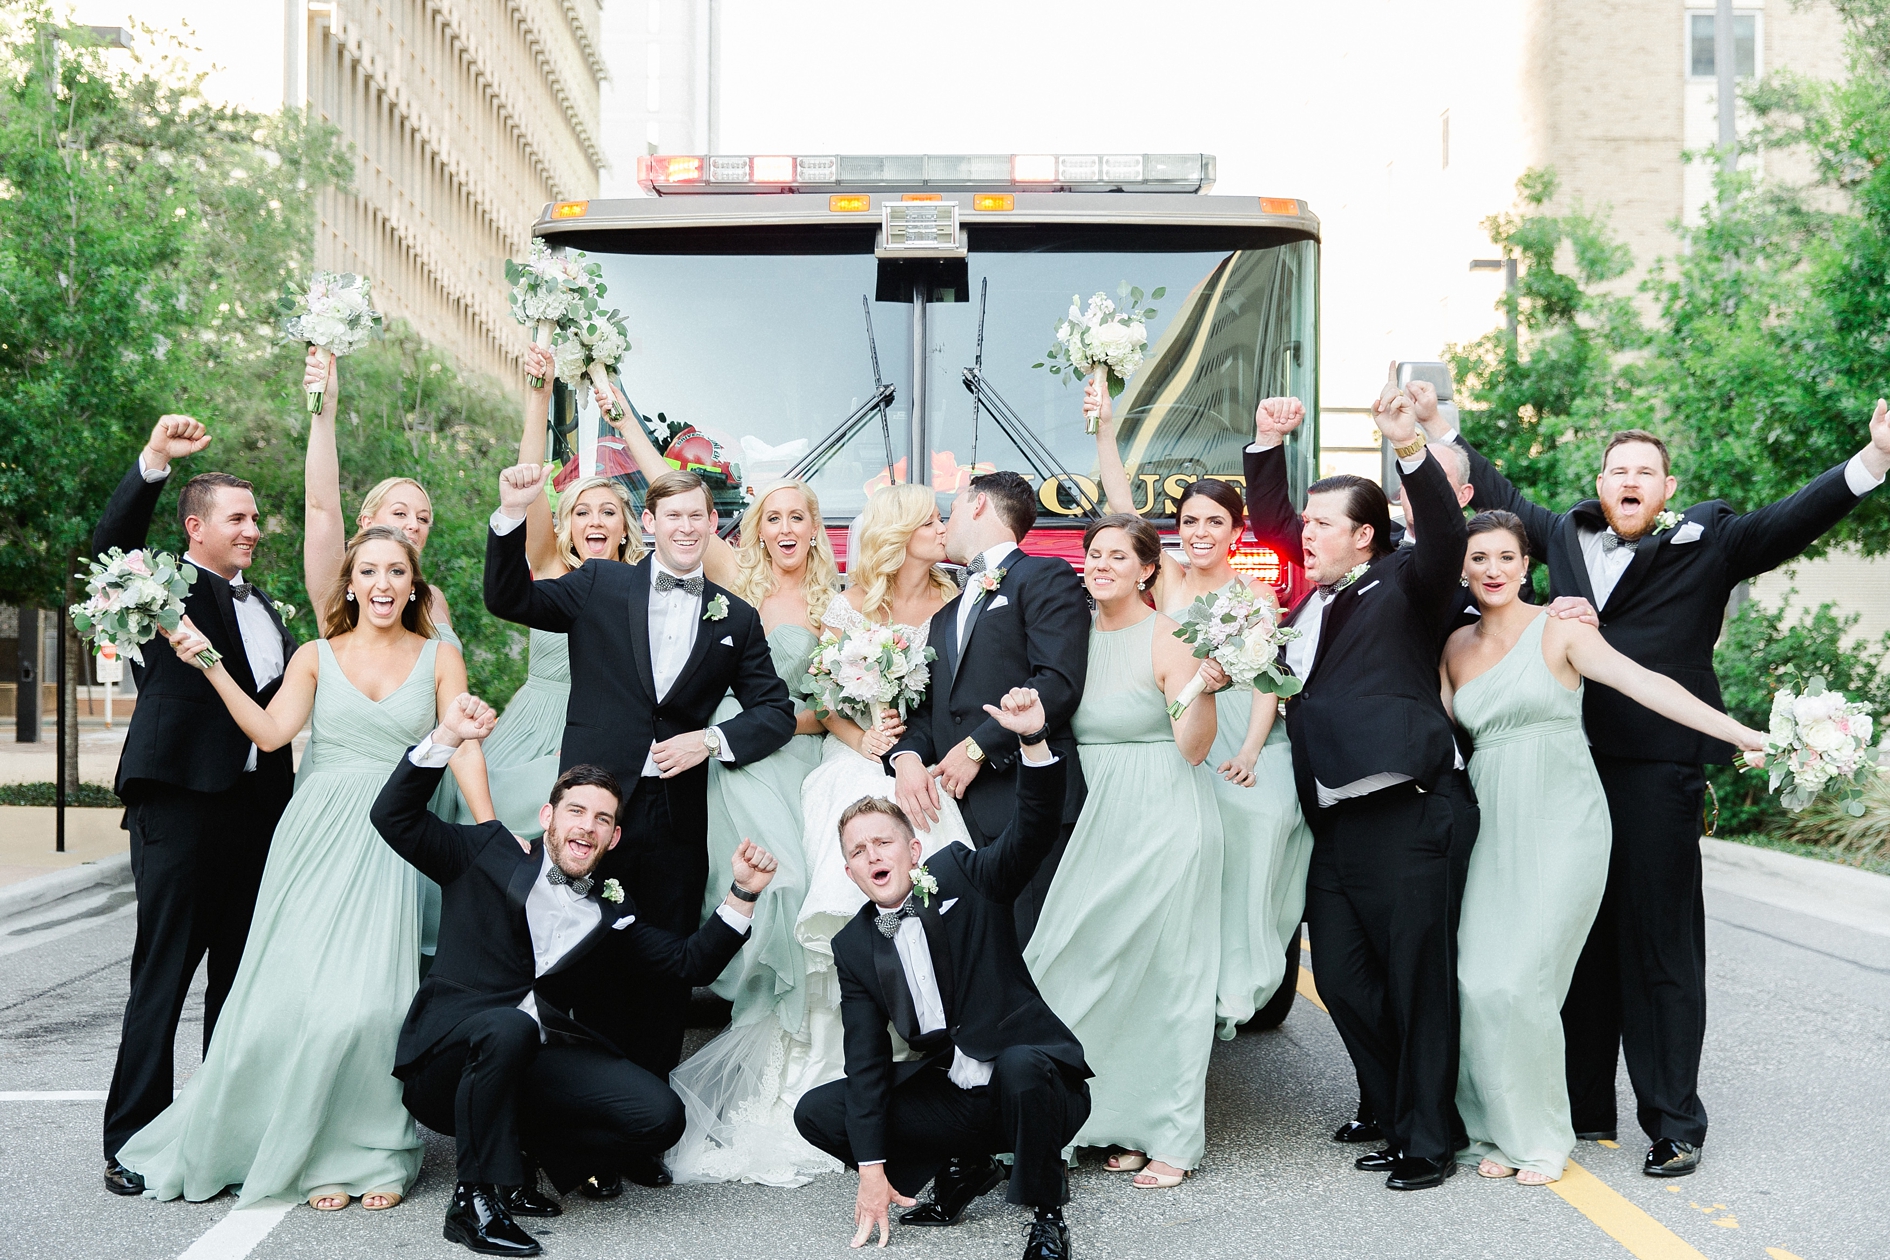 Photo Recipe | Large Bridal Parties | © Ailyn La Torre Photography 2017